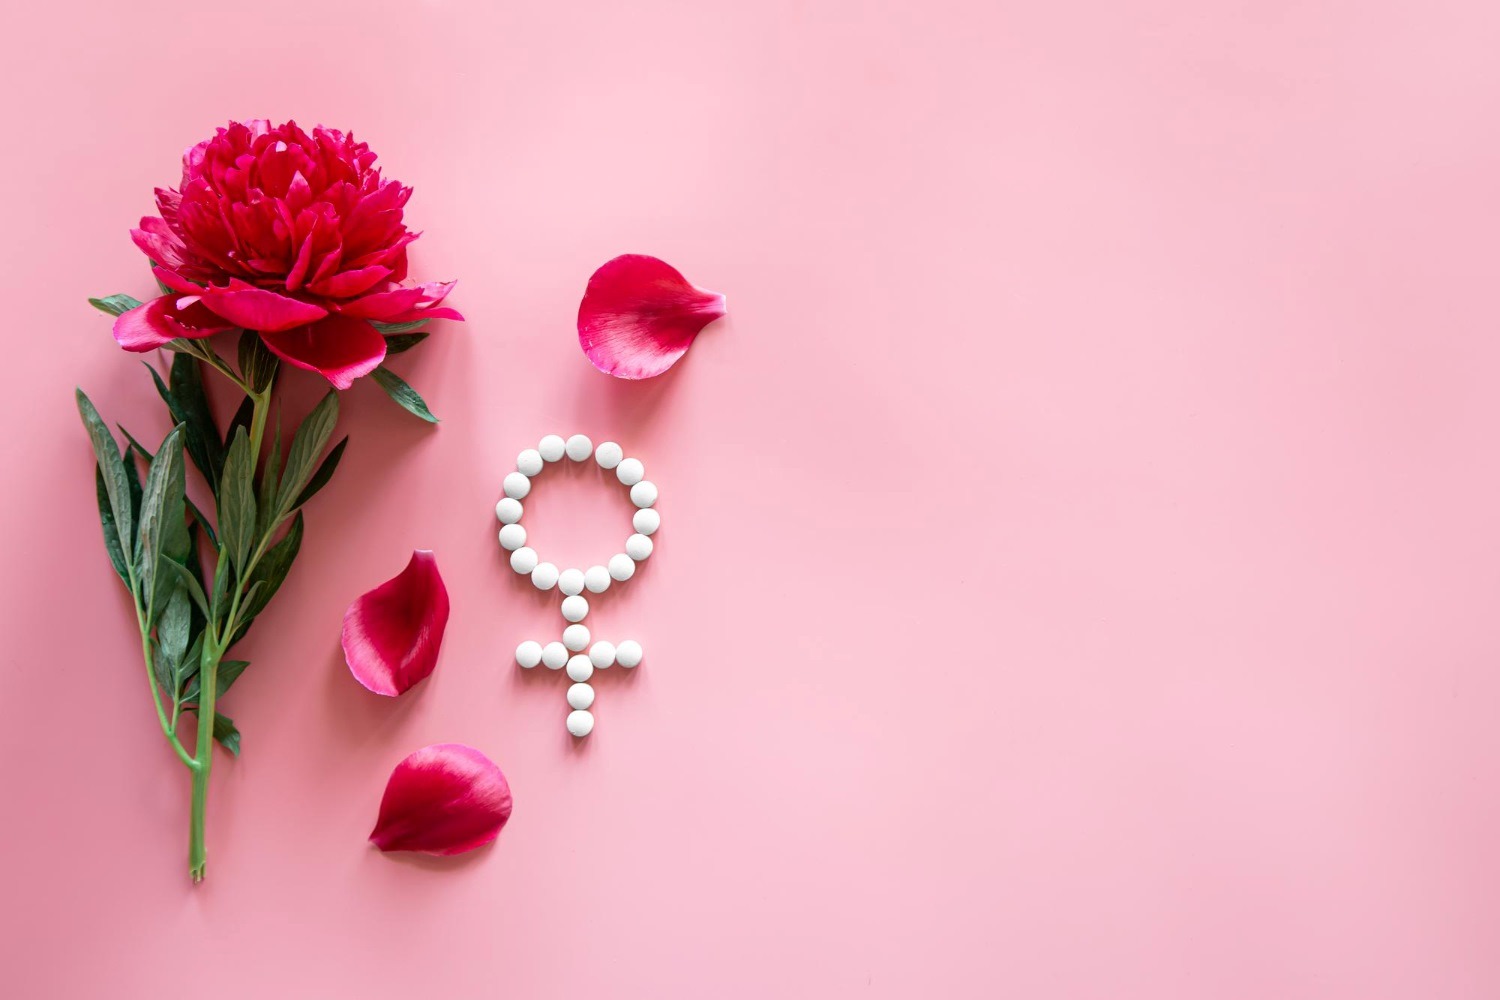 Photo: pvproductions via <a href="https://www.freepik.com/free-photo/gender-venus-symbol-made-pills-peony-flower-pink-background_28218998.htm#page=3&query=fertility&position=9&from_view=keyword&track=sph&uuid=22ed4e86-d71f-4fd6-86b2-7a01fac8765b" rel="noopener" target="_blank">Freepik</a>